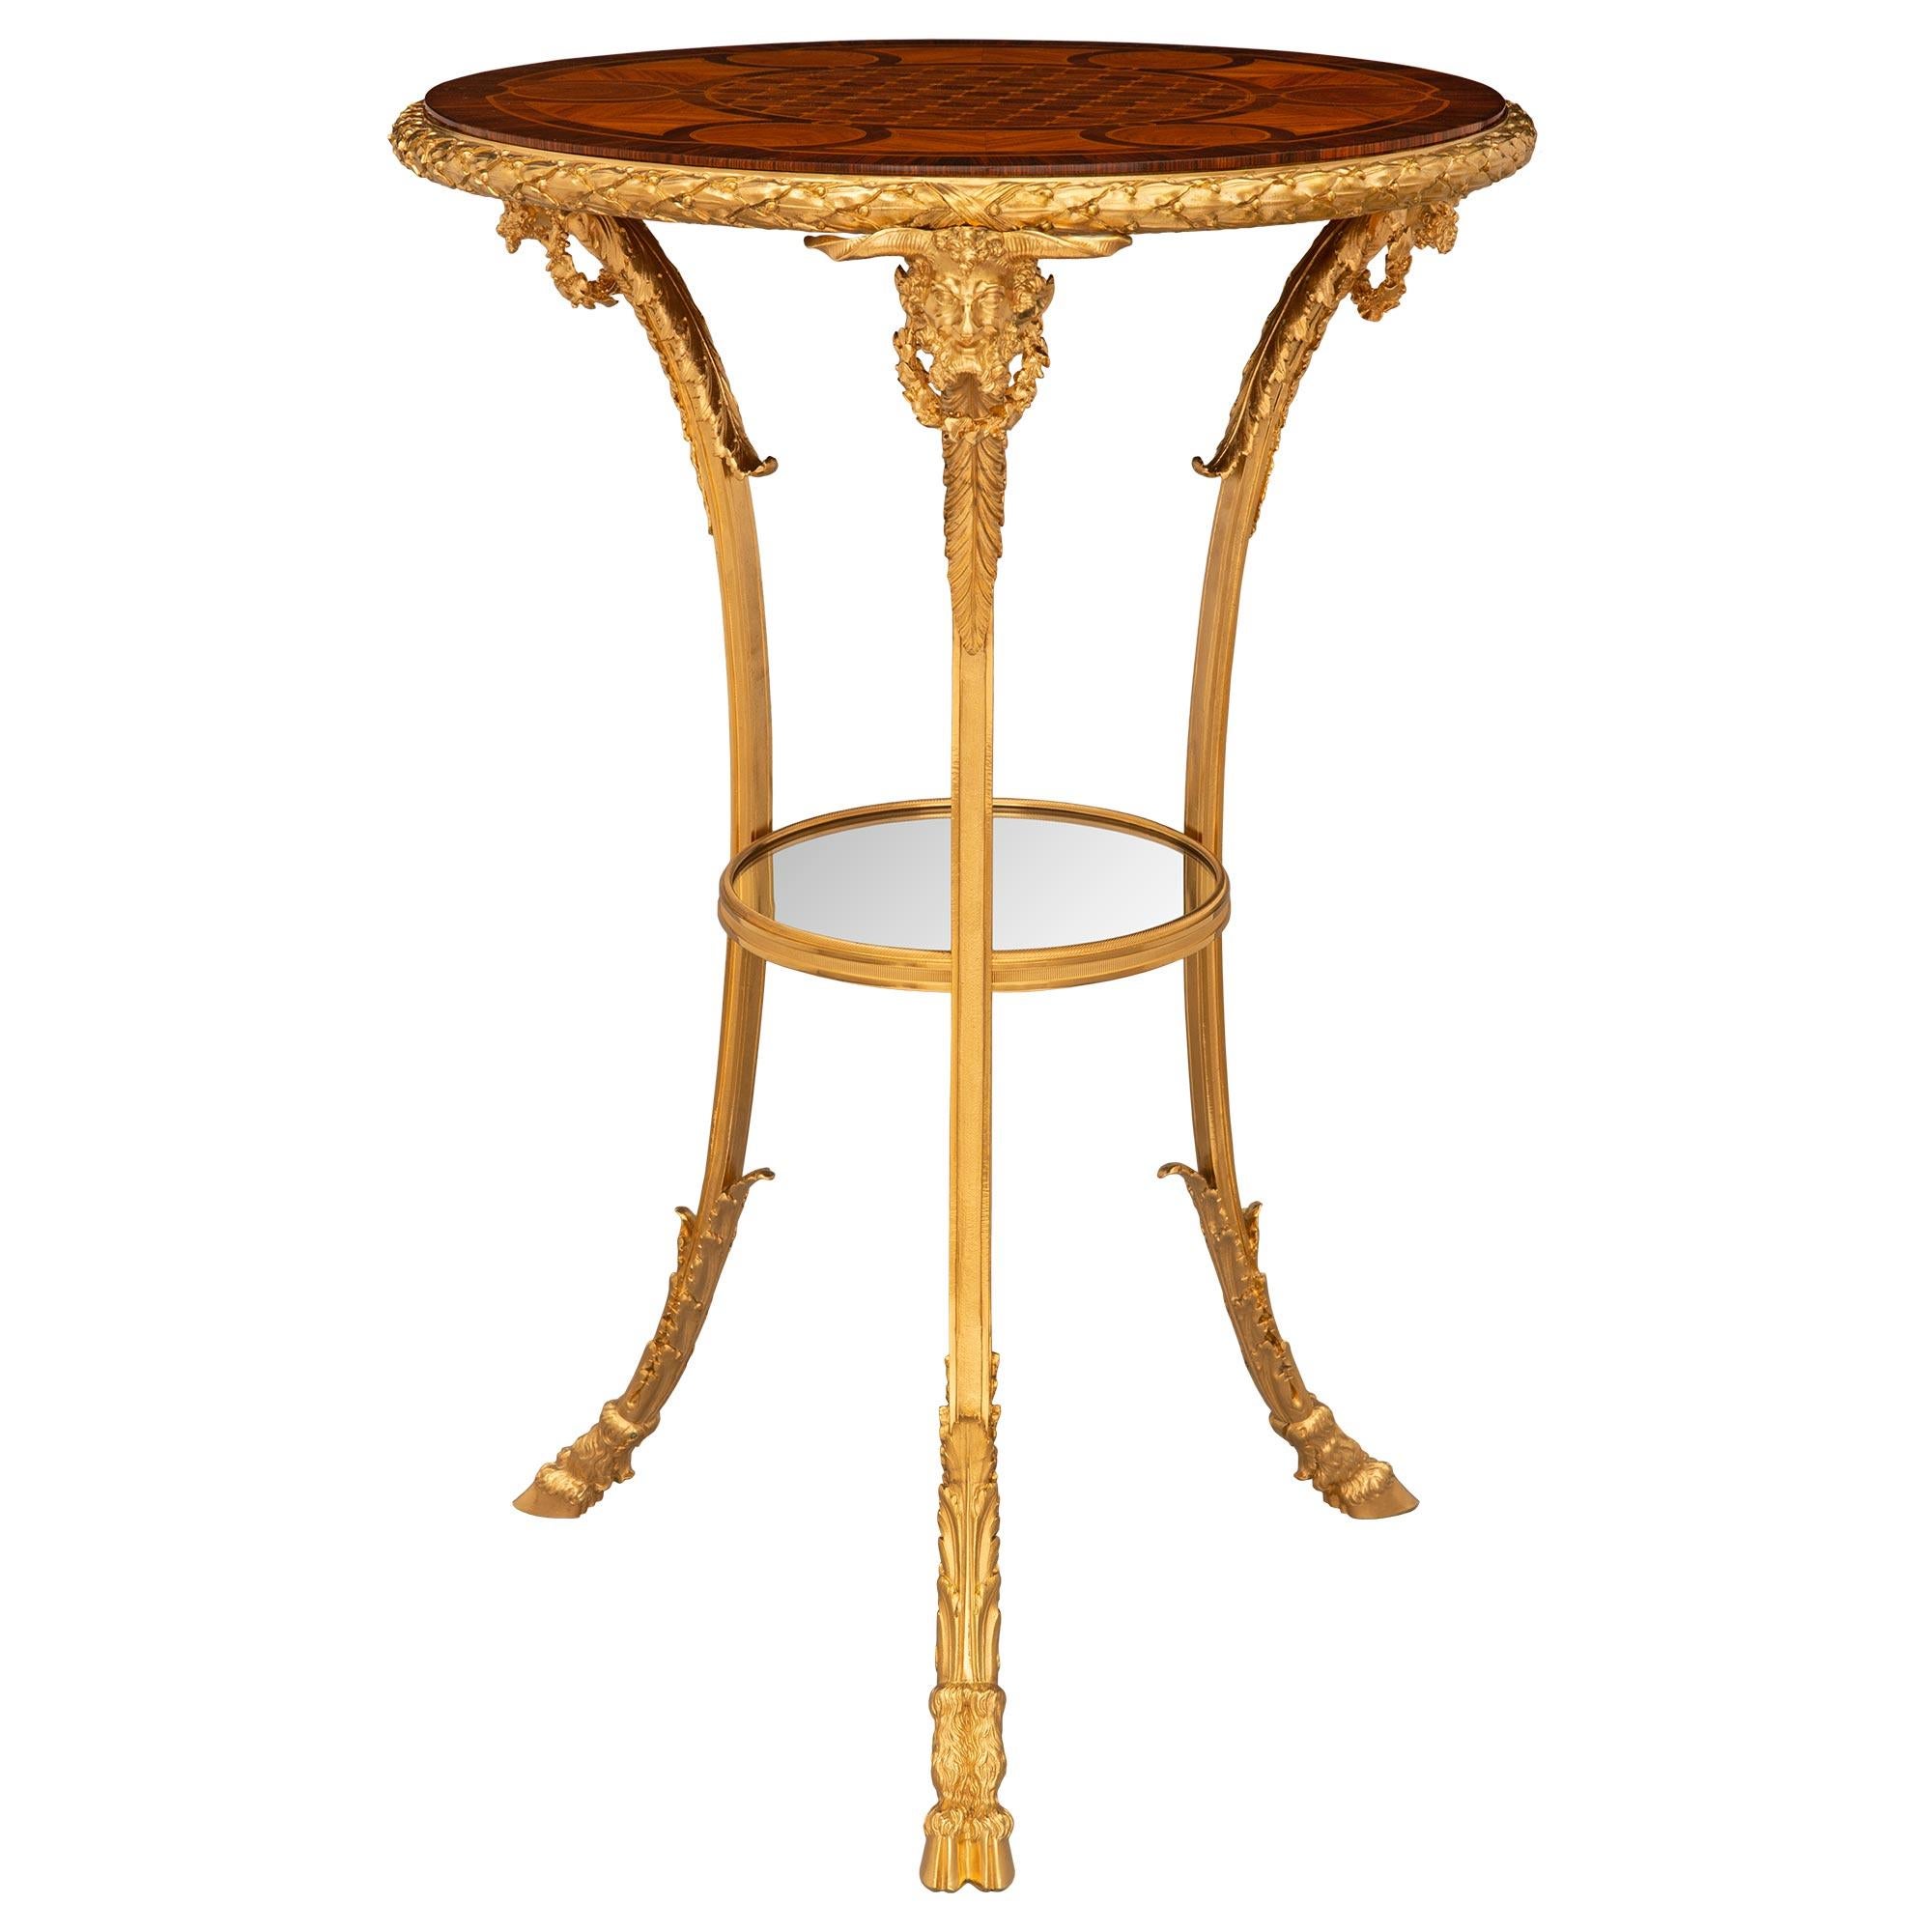 French 19th Century Belle Époque Period Kingwood, Tulipwood, Ormolu Side Table For Sale 5